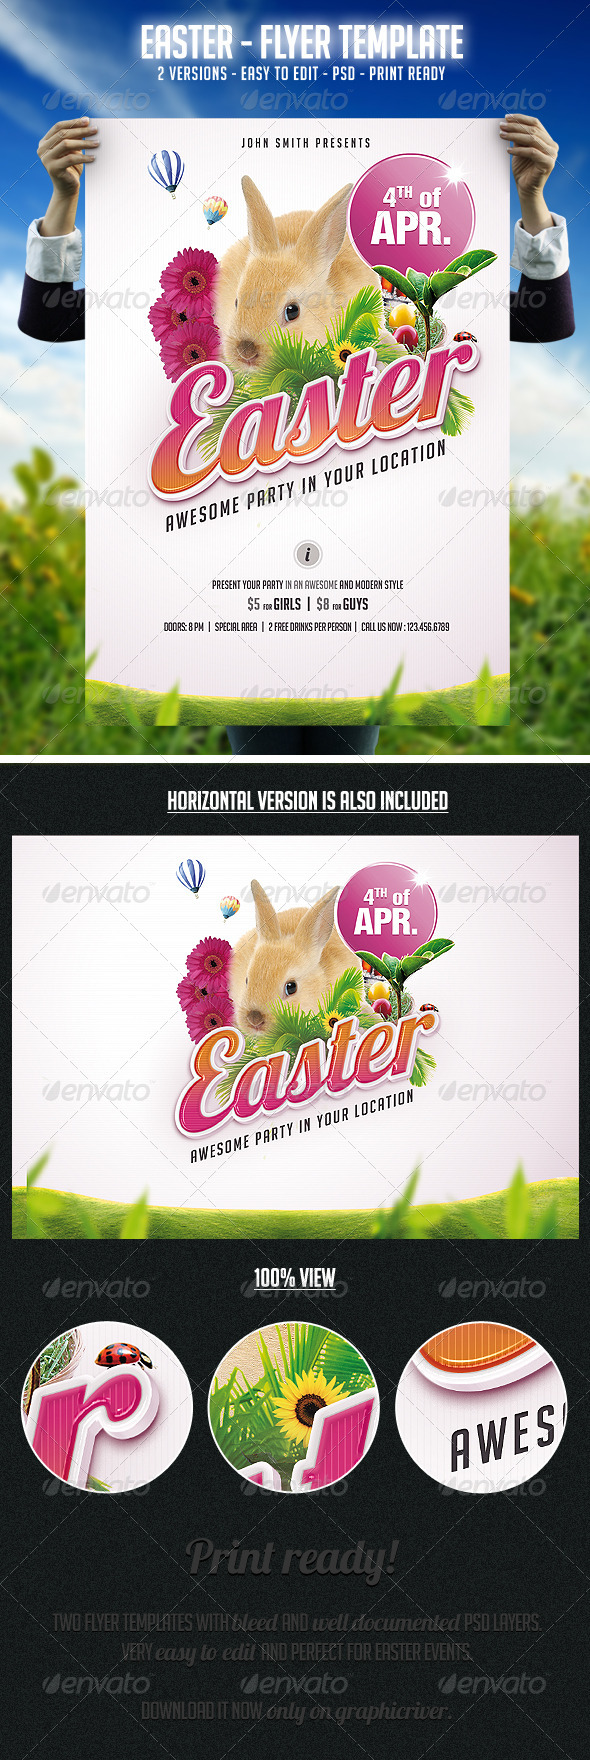 Easter - Flyer Template